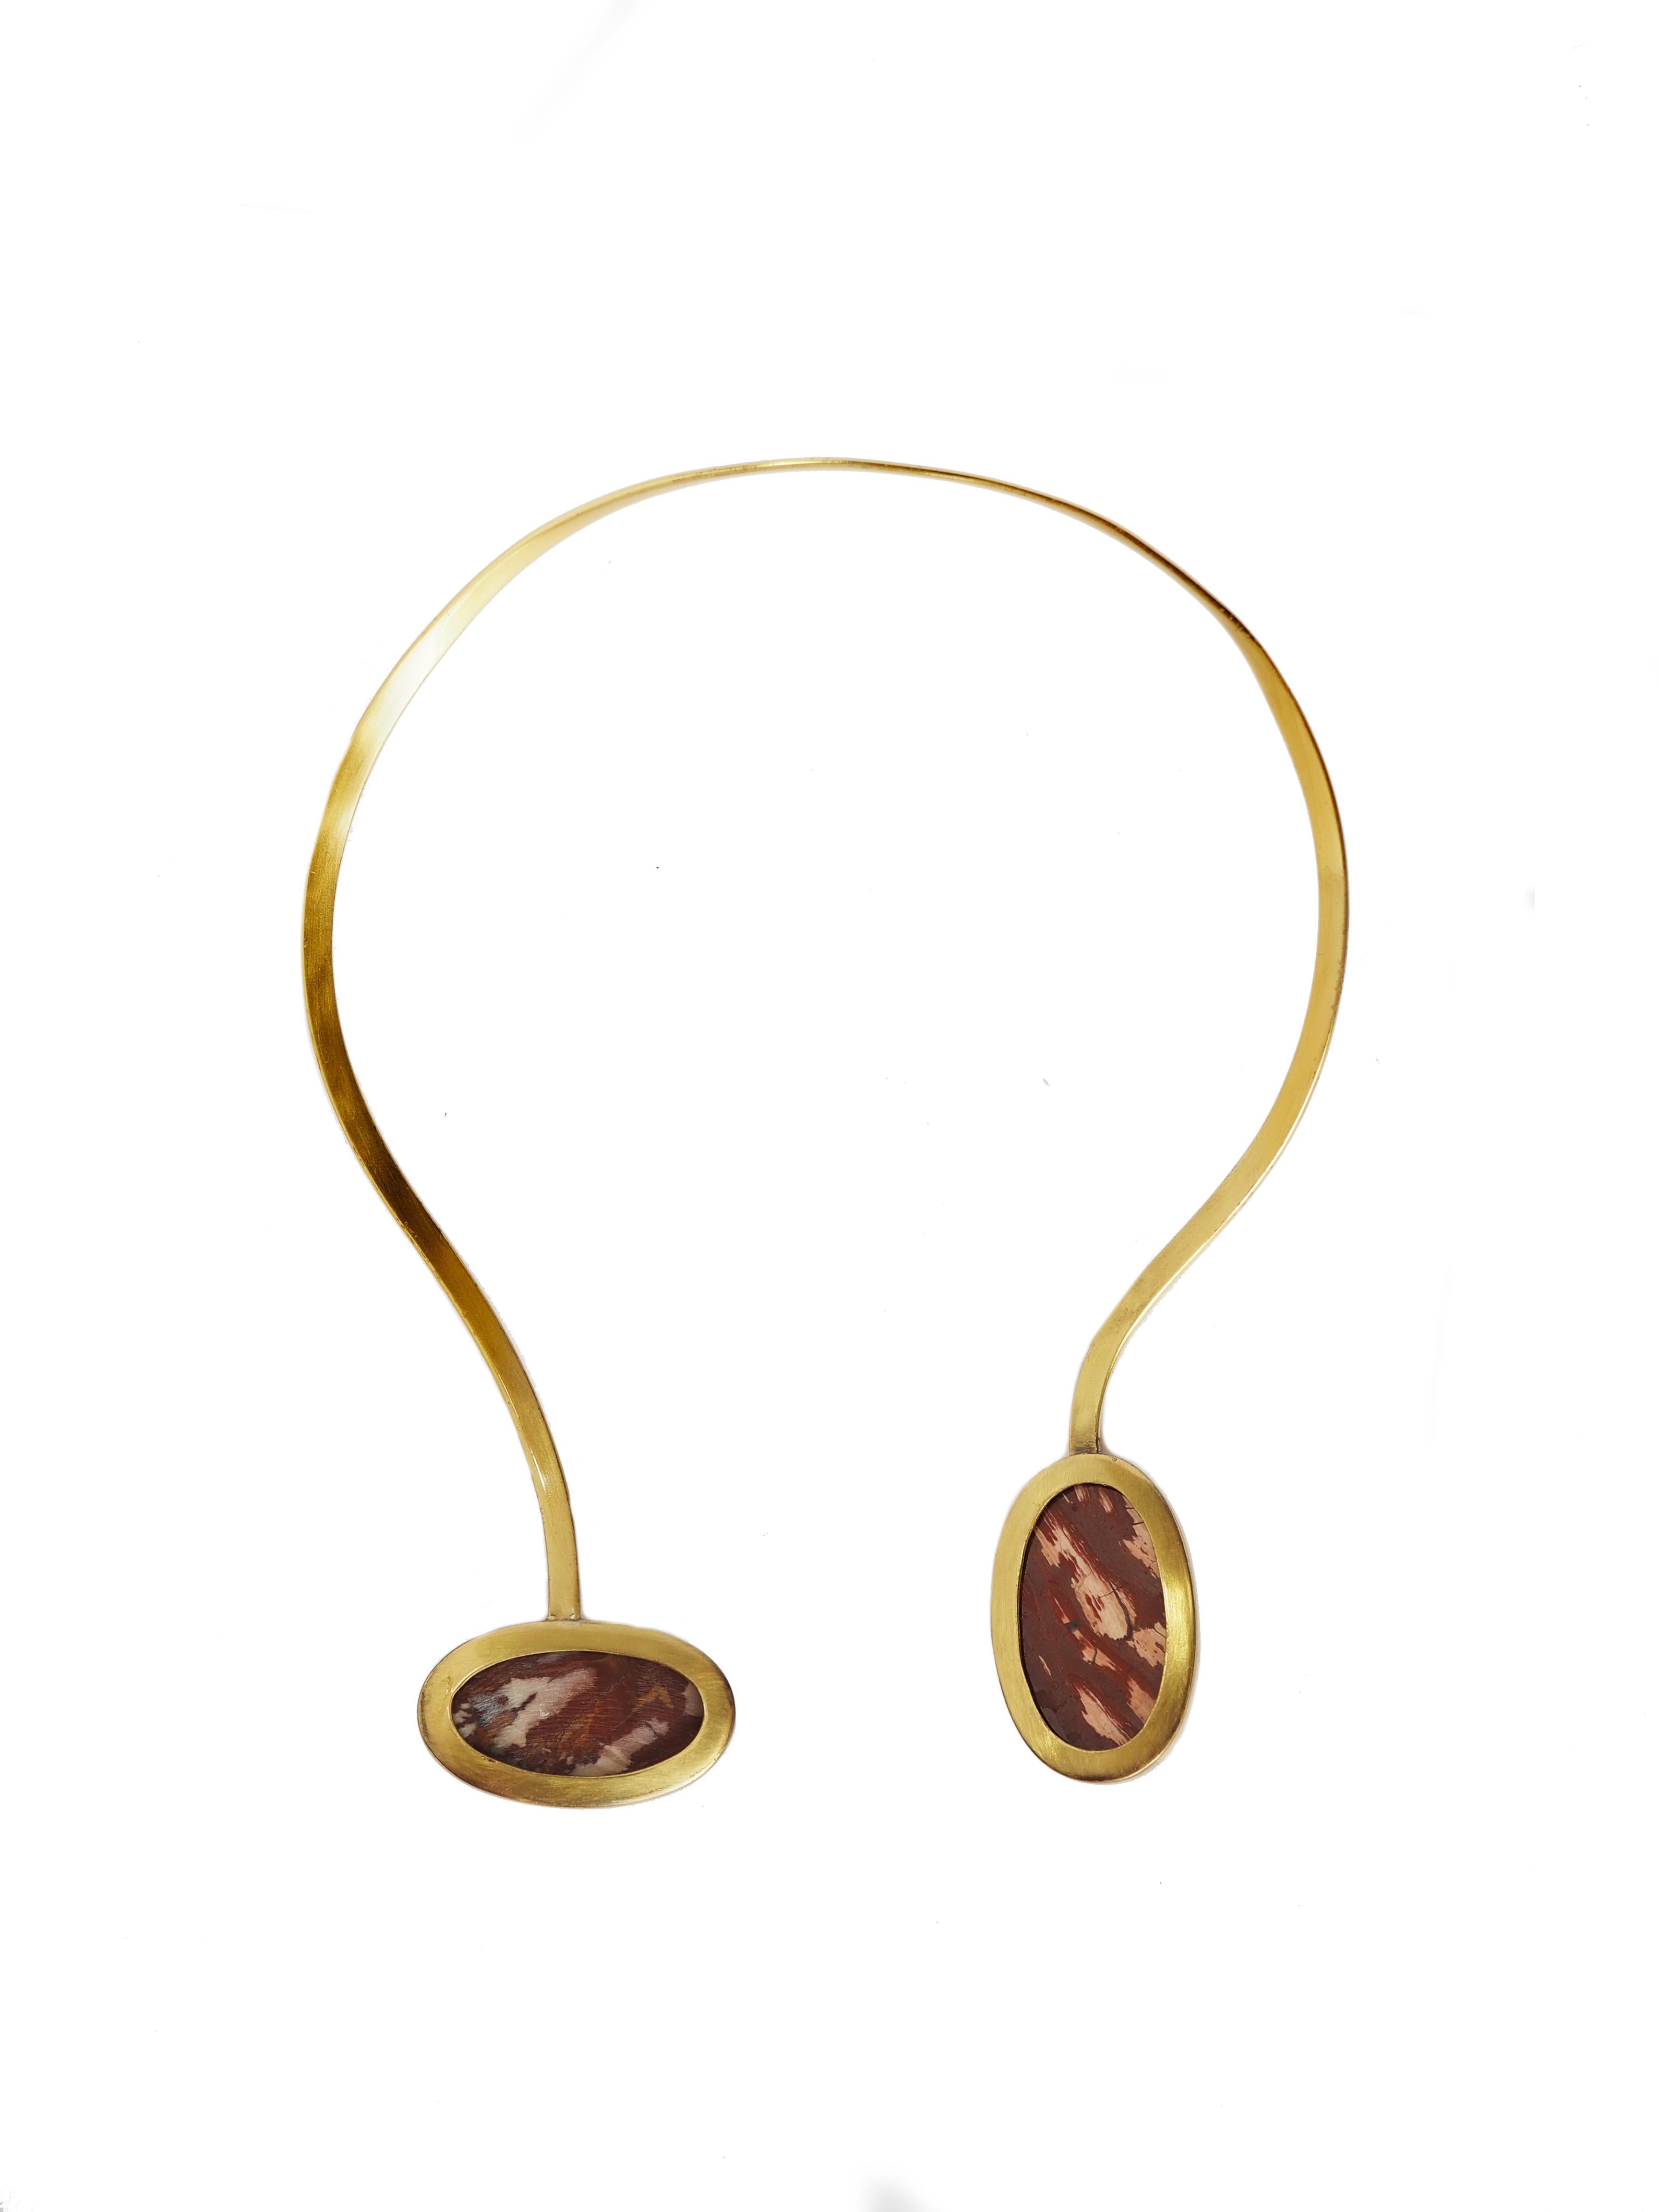 asymmetric necklace with 2 amazing jasper oval shape linked in bronze.
All Giulia Colussi jewelry is new and has never been previously owned or worn. Each item will arrive at your door beautifully gift wrapped in our boxes, put inside an elegant